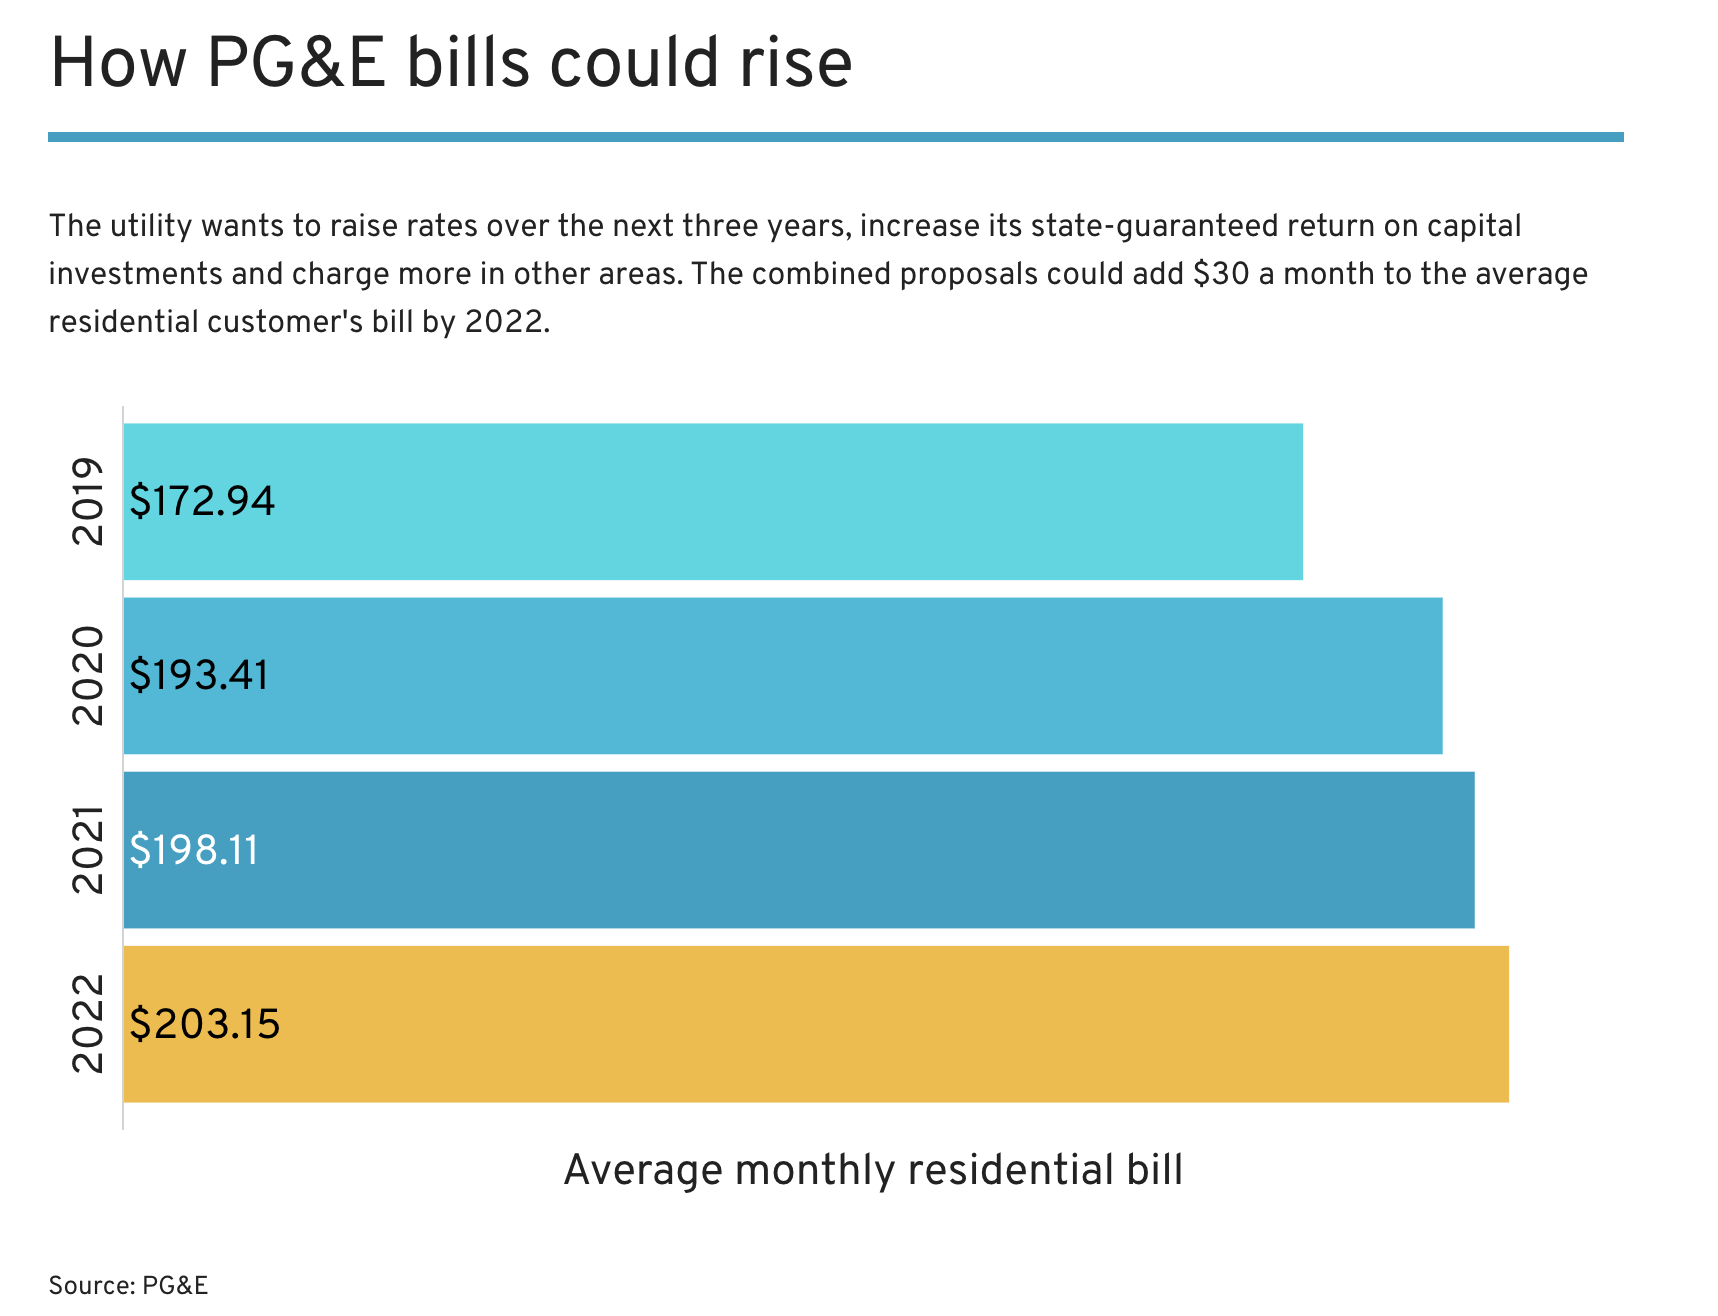 how much could PG&E bills rise? 